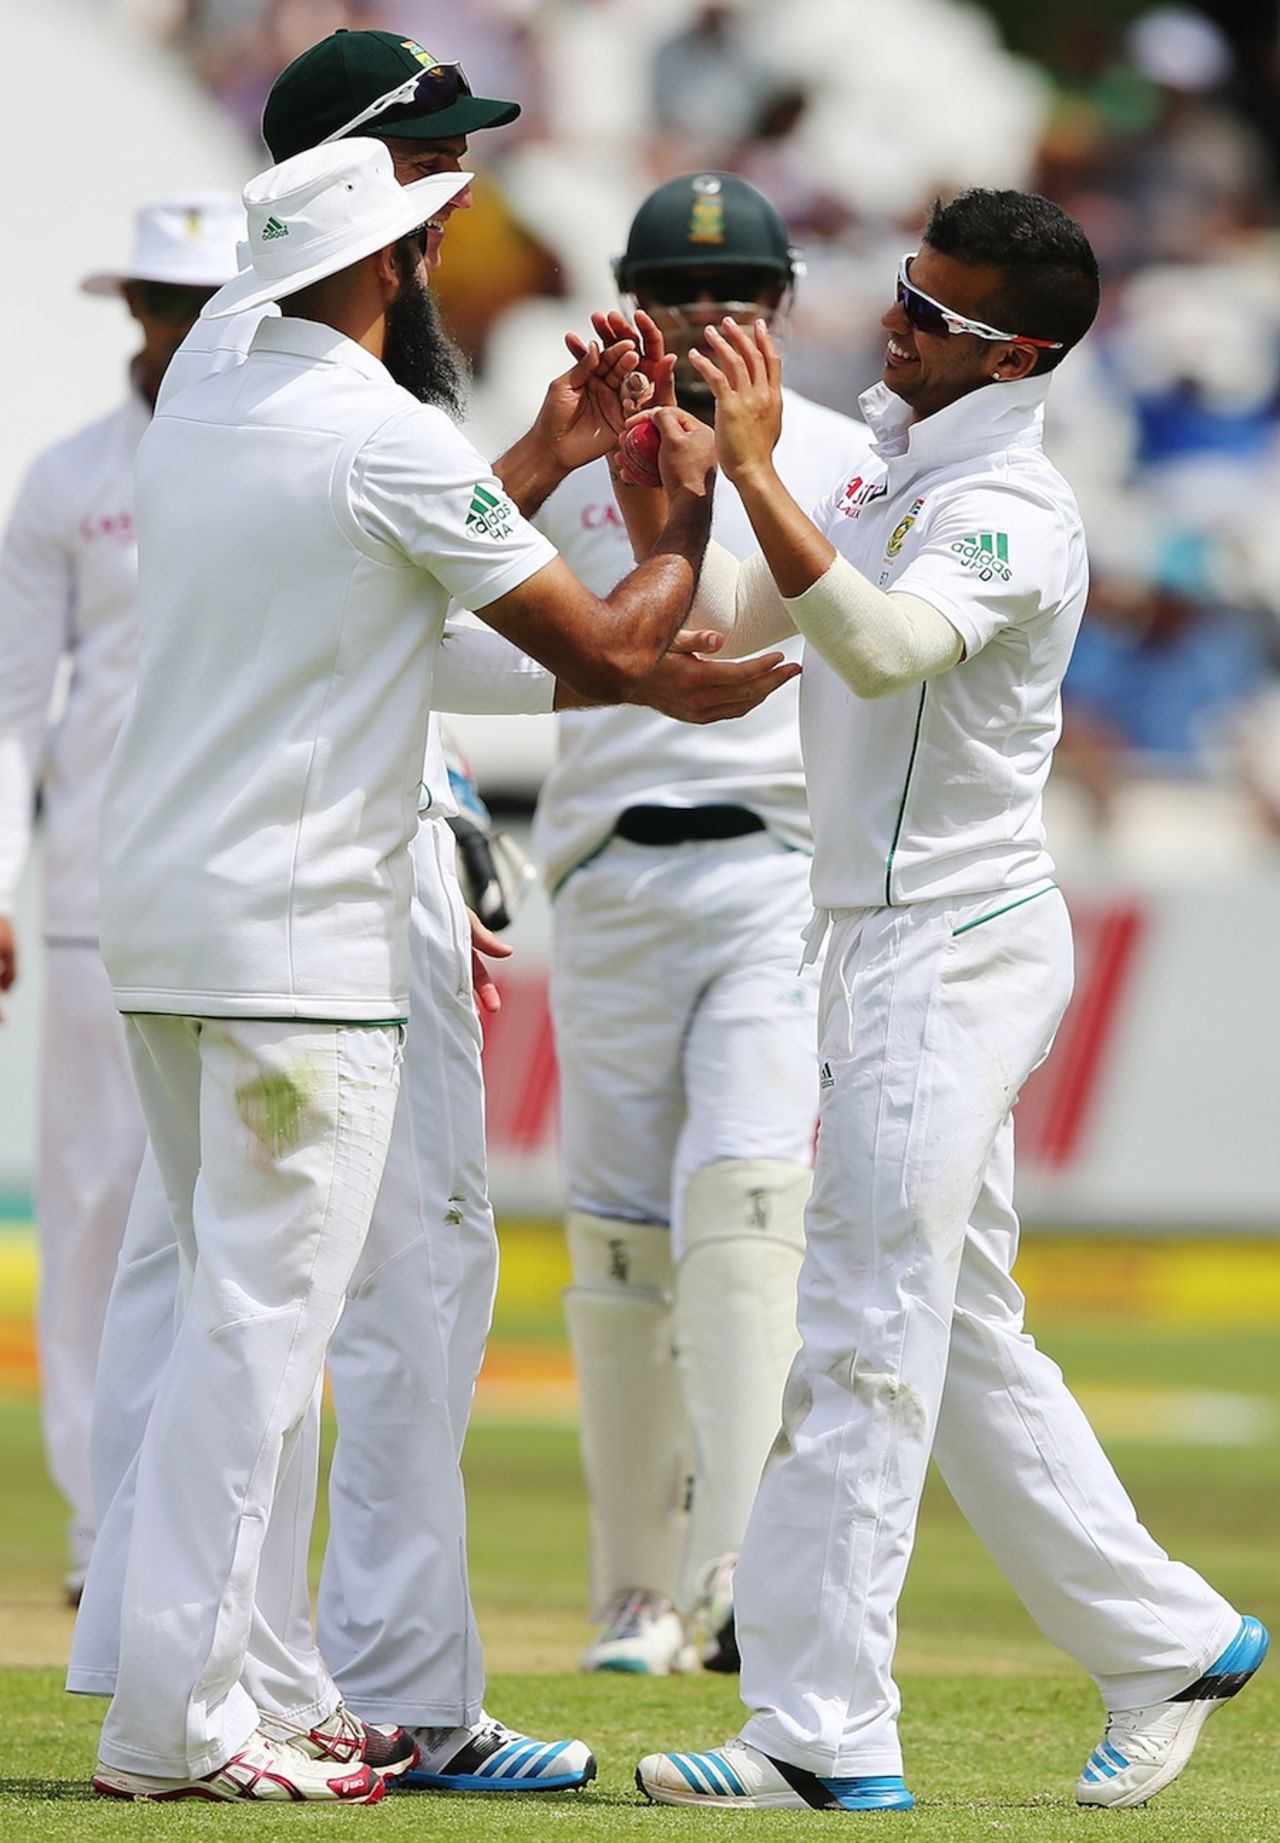 JP Duminy picked up three wickets on the second day, South Africa v Australia, 3rd Test, Cape Town, 2nd day, March 2, 2014